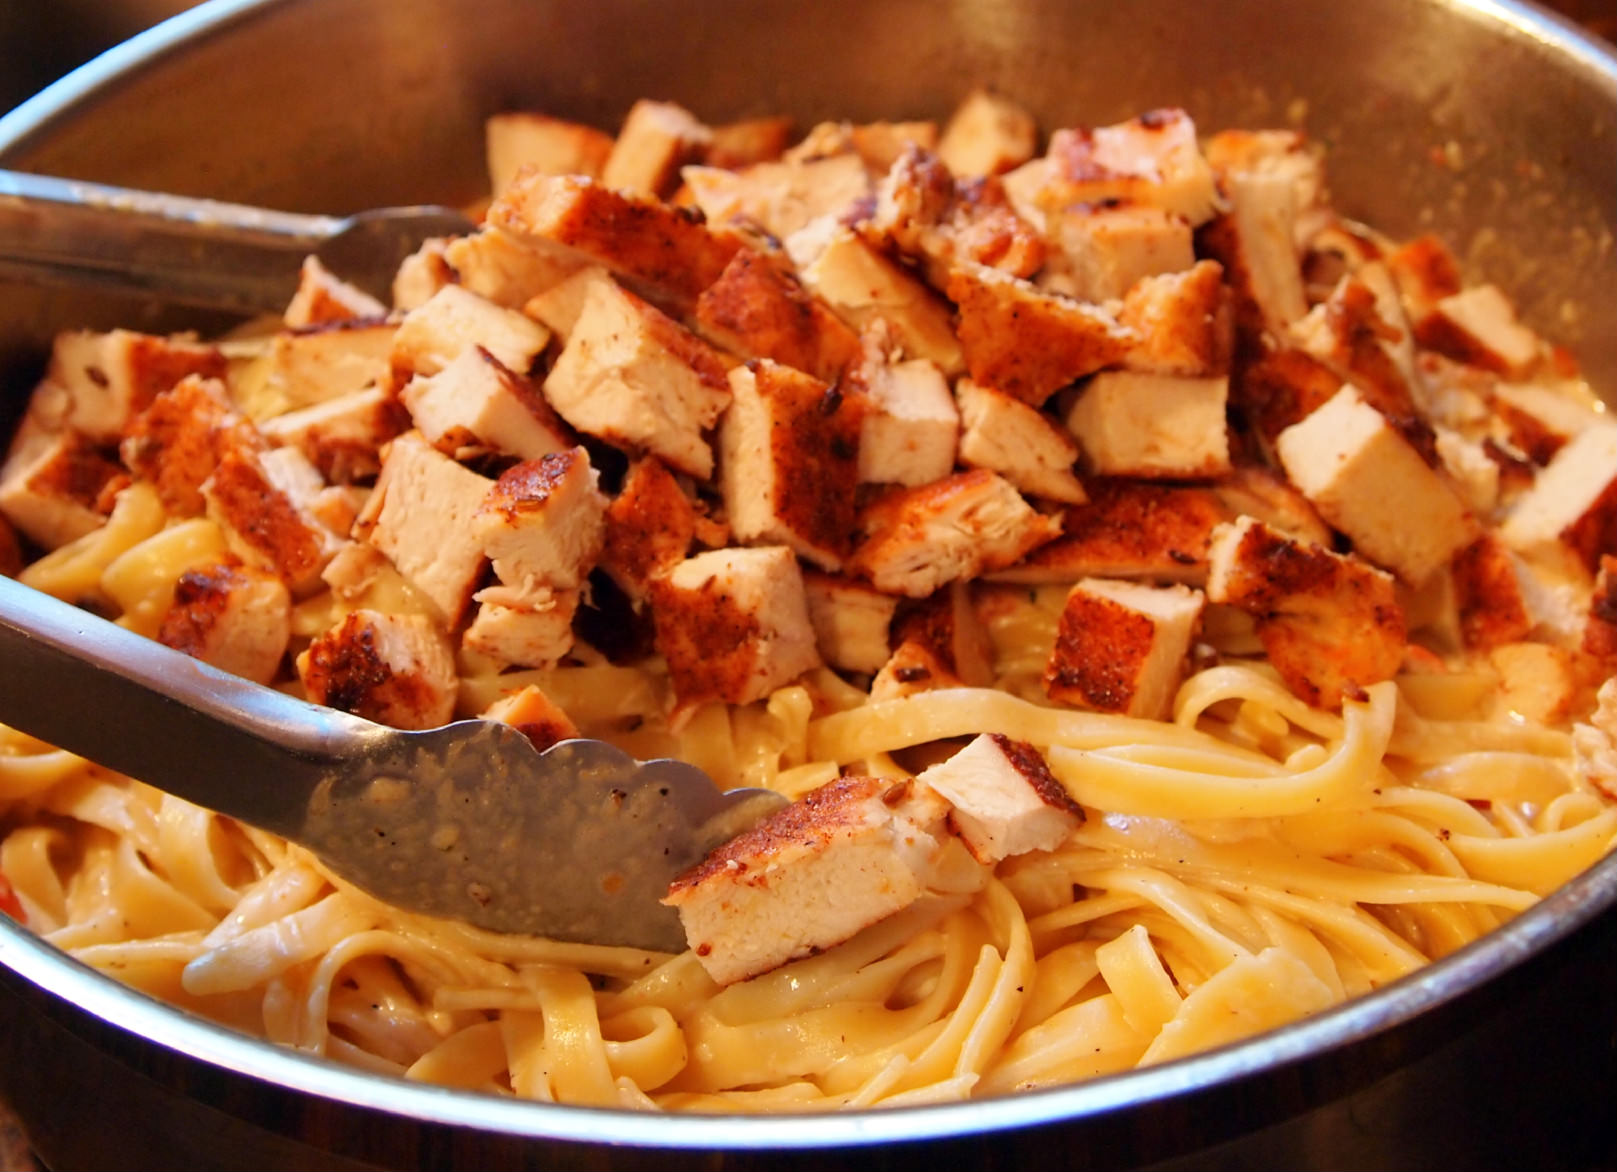 Cajun-Chicken-Fettuccine-Alfredo is a perfect meal for date night. The spicy chicken and rich cream sauce makes eating a restaurant quality meal a reality.